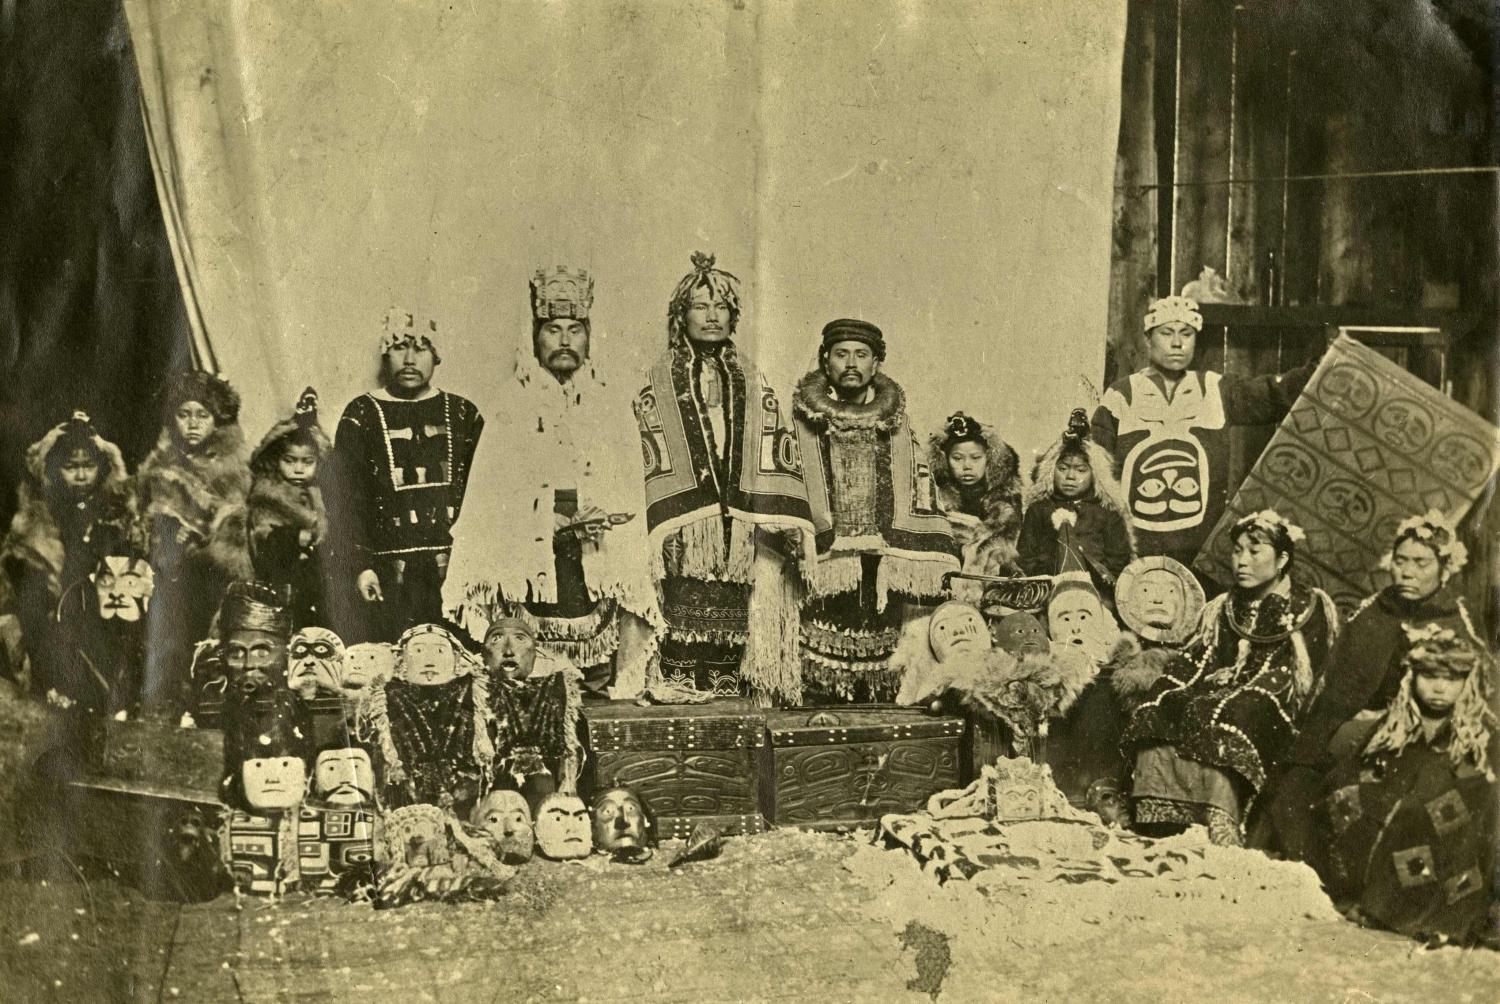 Nisga'a chiefs and families posing with goods from potlatch in 1903.